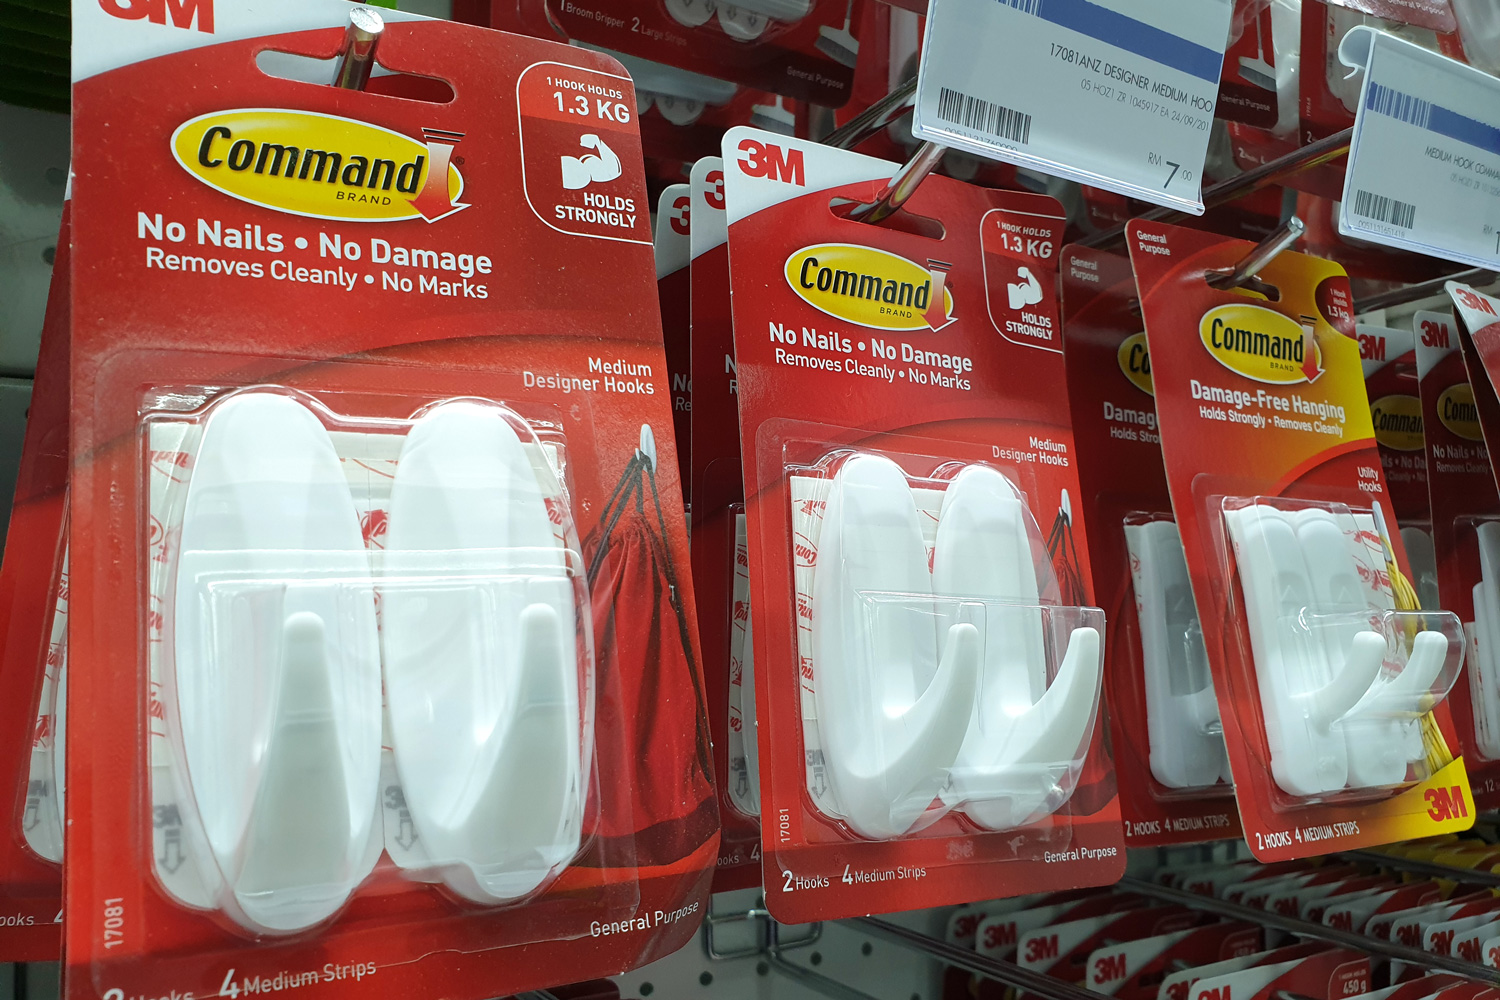 ommand brand Picture Hanging Strips and Hooks by 3M company on store shelf. 